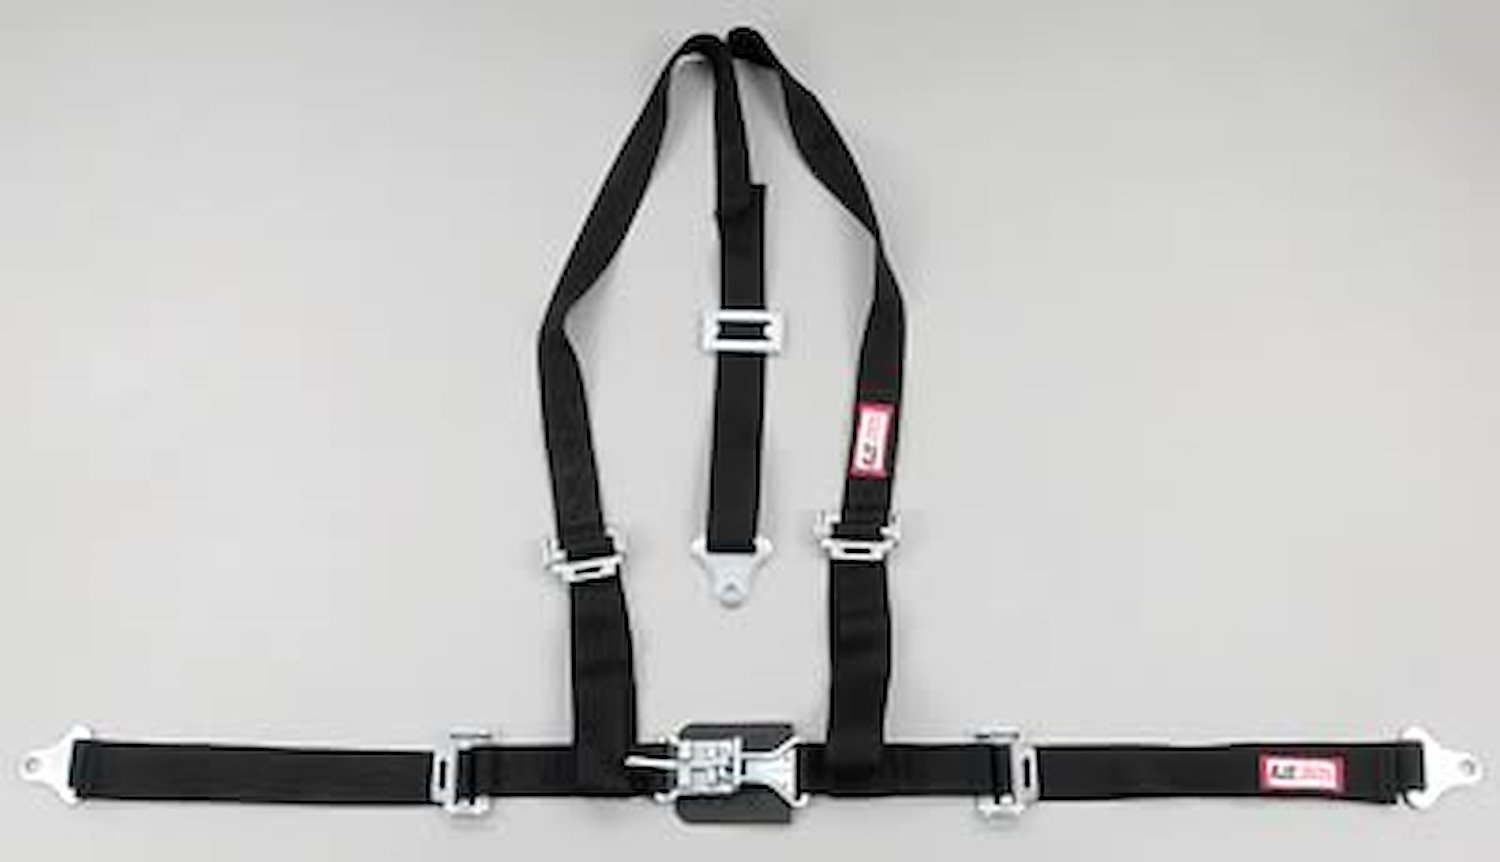 NON-SFI L&L HARNESS 2 PULL UP Lap Belt SEWN IN 2 S.H. V ROLL BAR Mount ALL BOLT ENDS BLACK